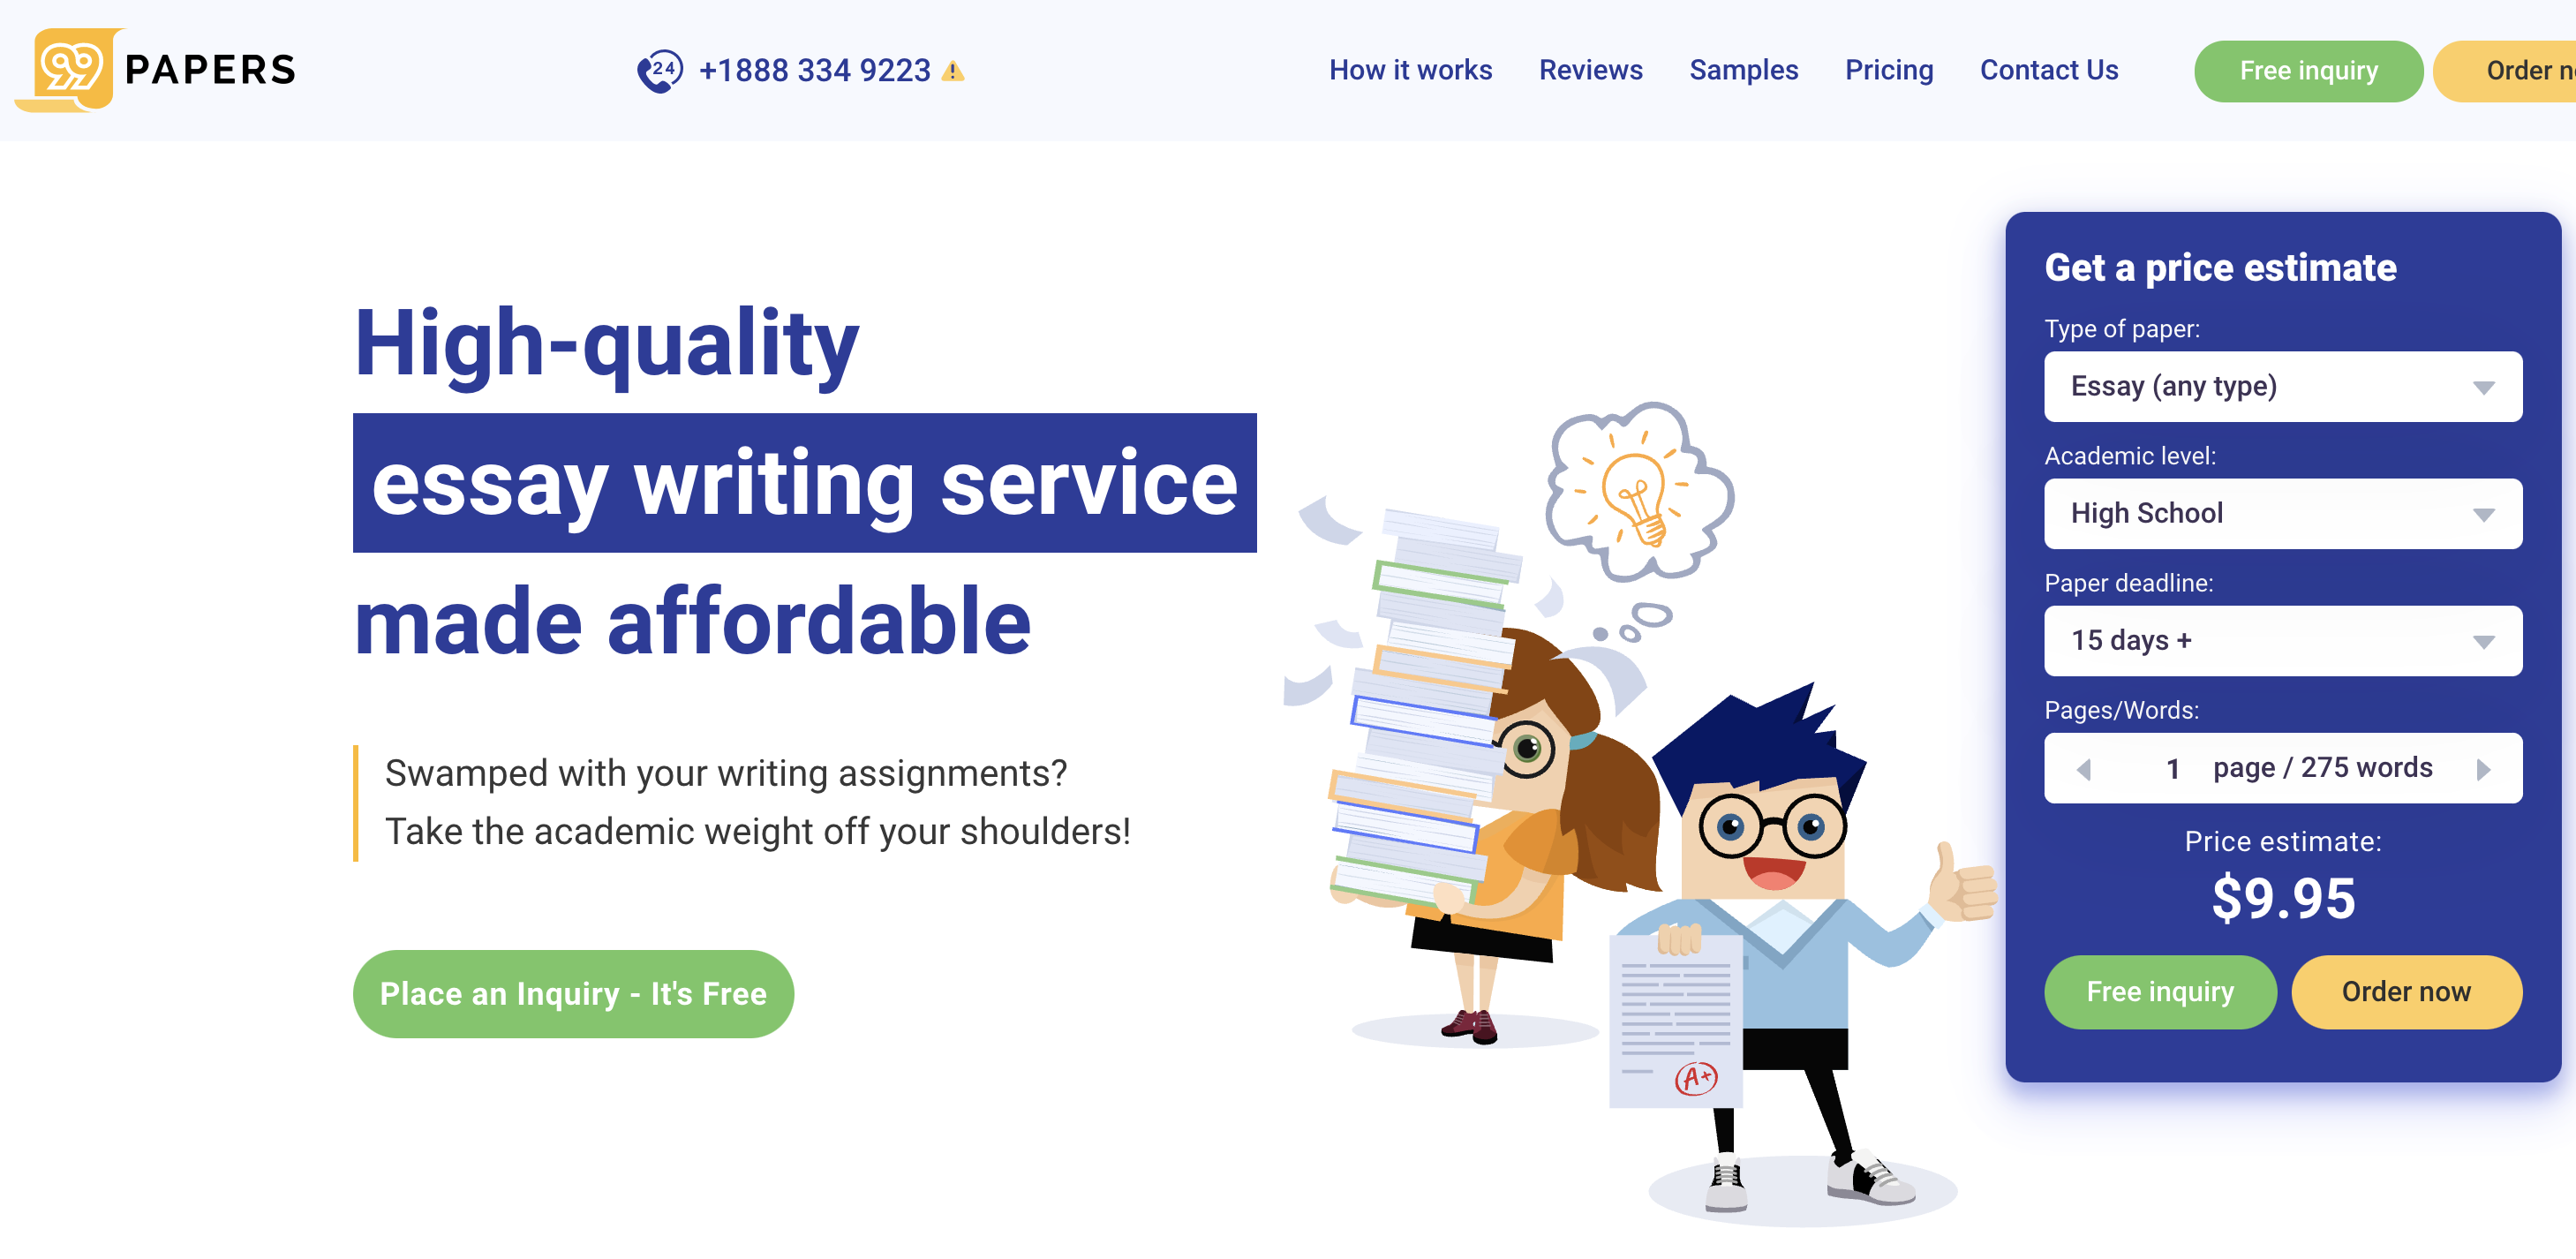 Cheap Essay Writing Service   Order an Essay Now   IsEssay